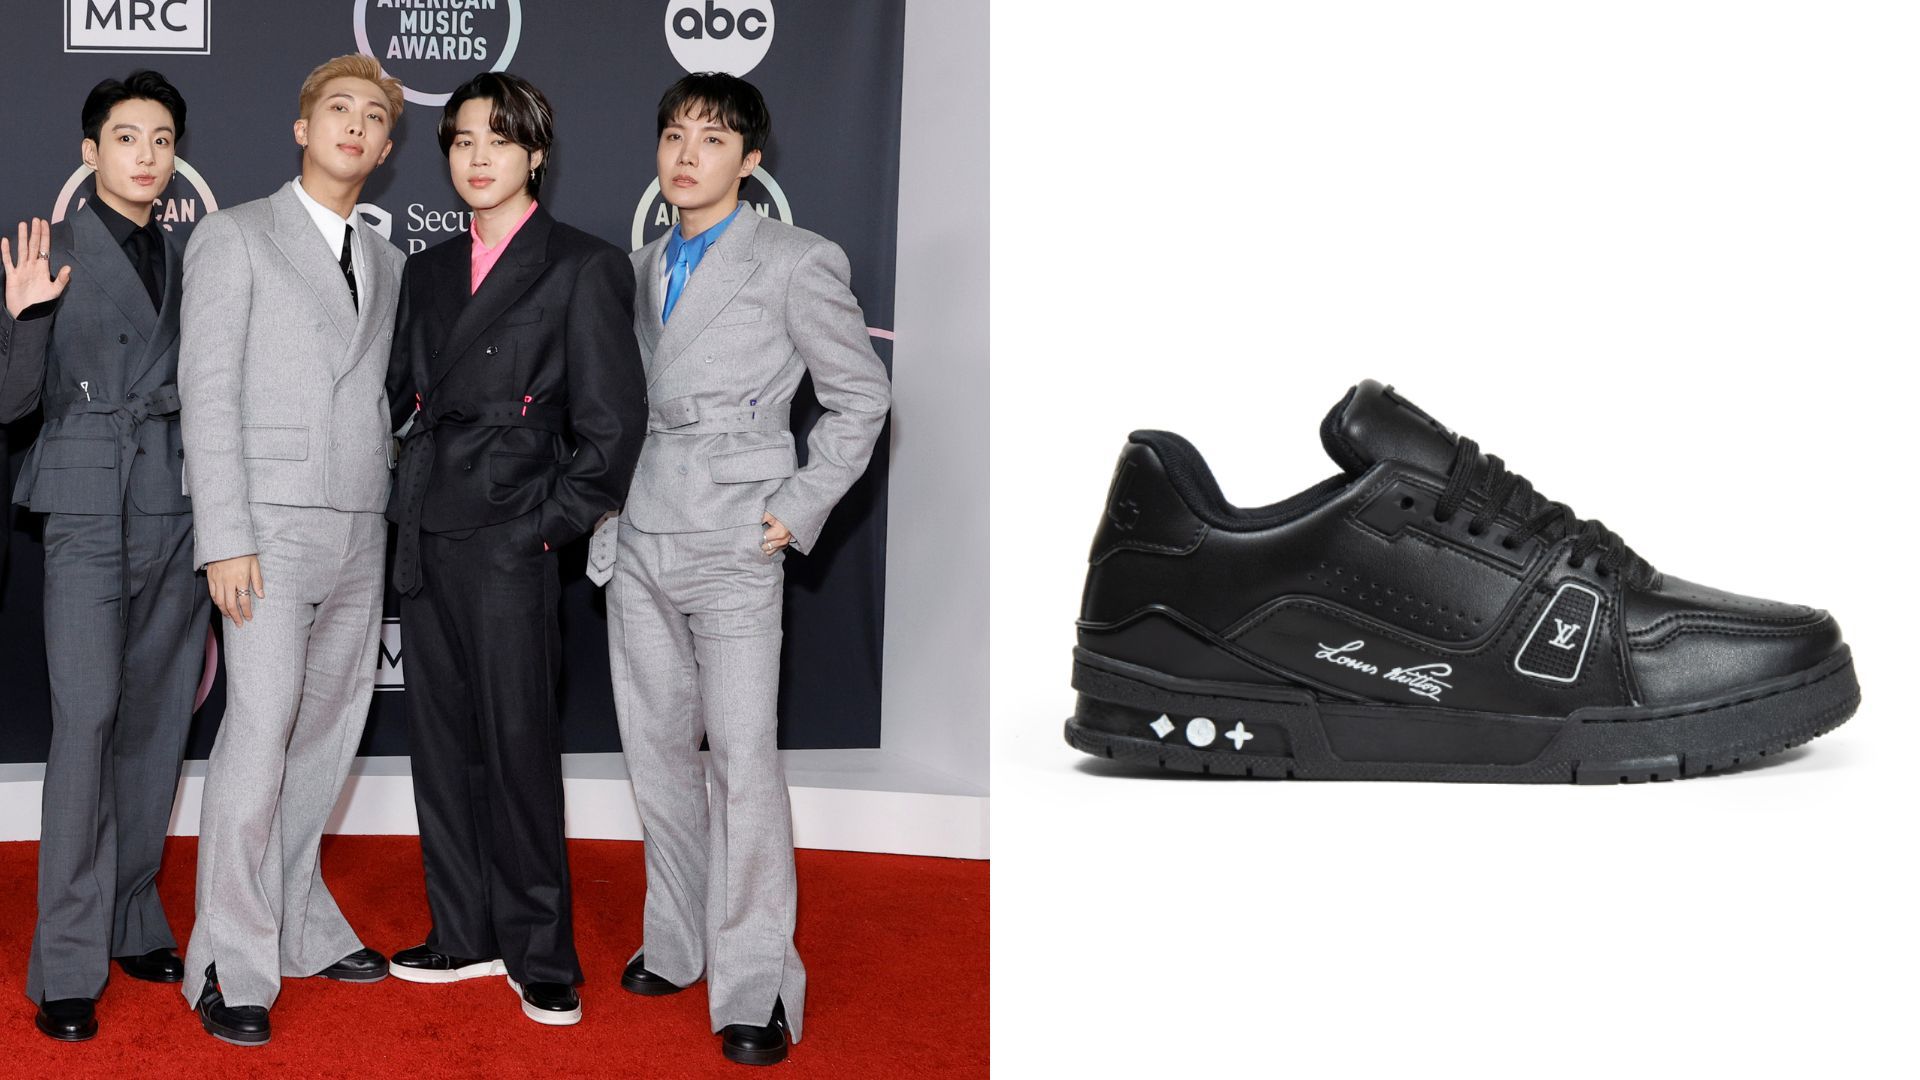 The Most Expensive Luxury Shoes Owned by Fashionista BTS J-Hope